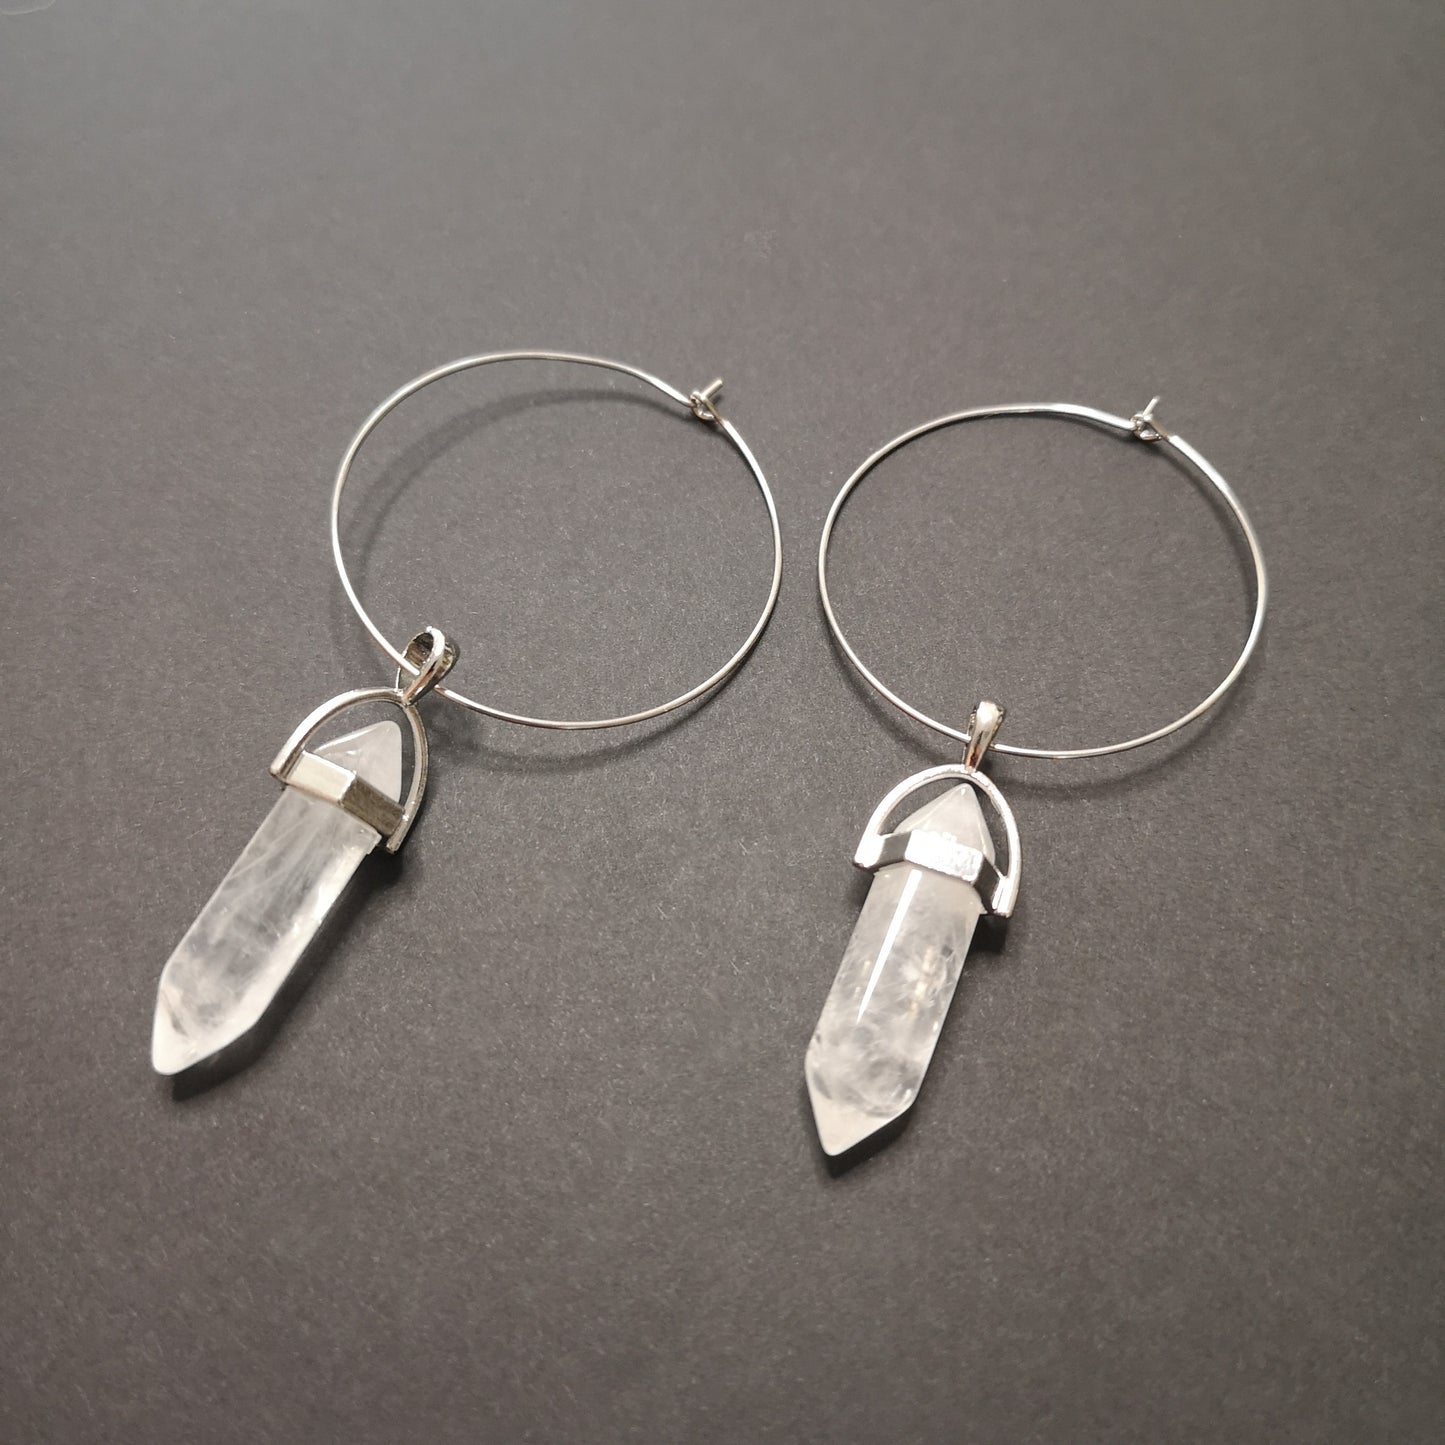 Quartz hoop earrings boho and witchy jewelry Baguette Magick